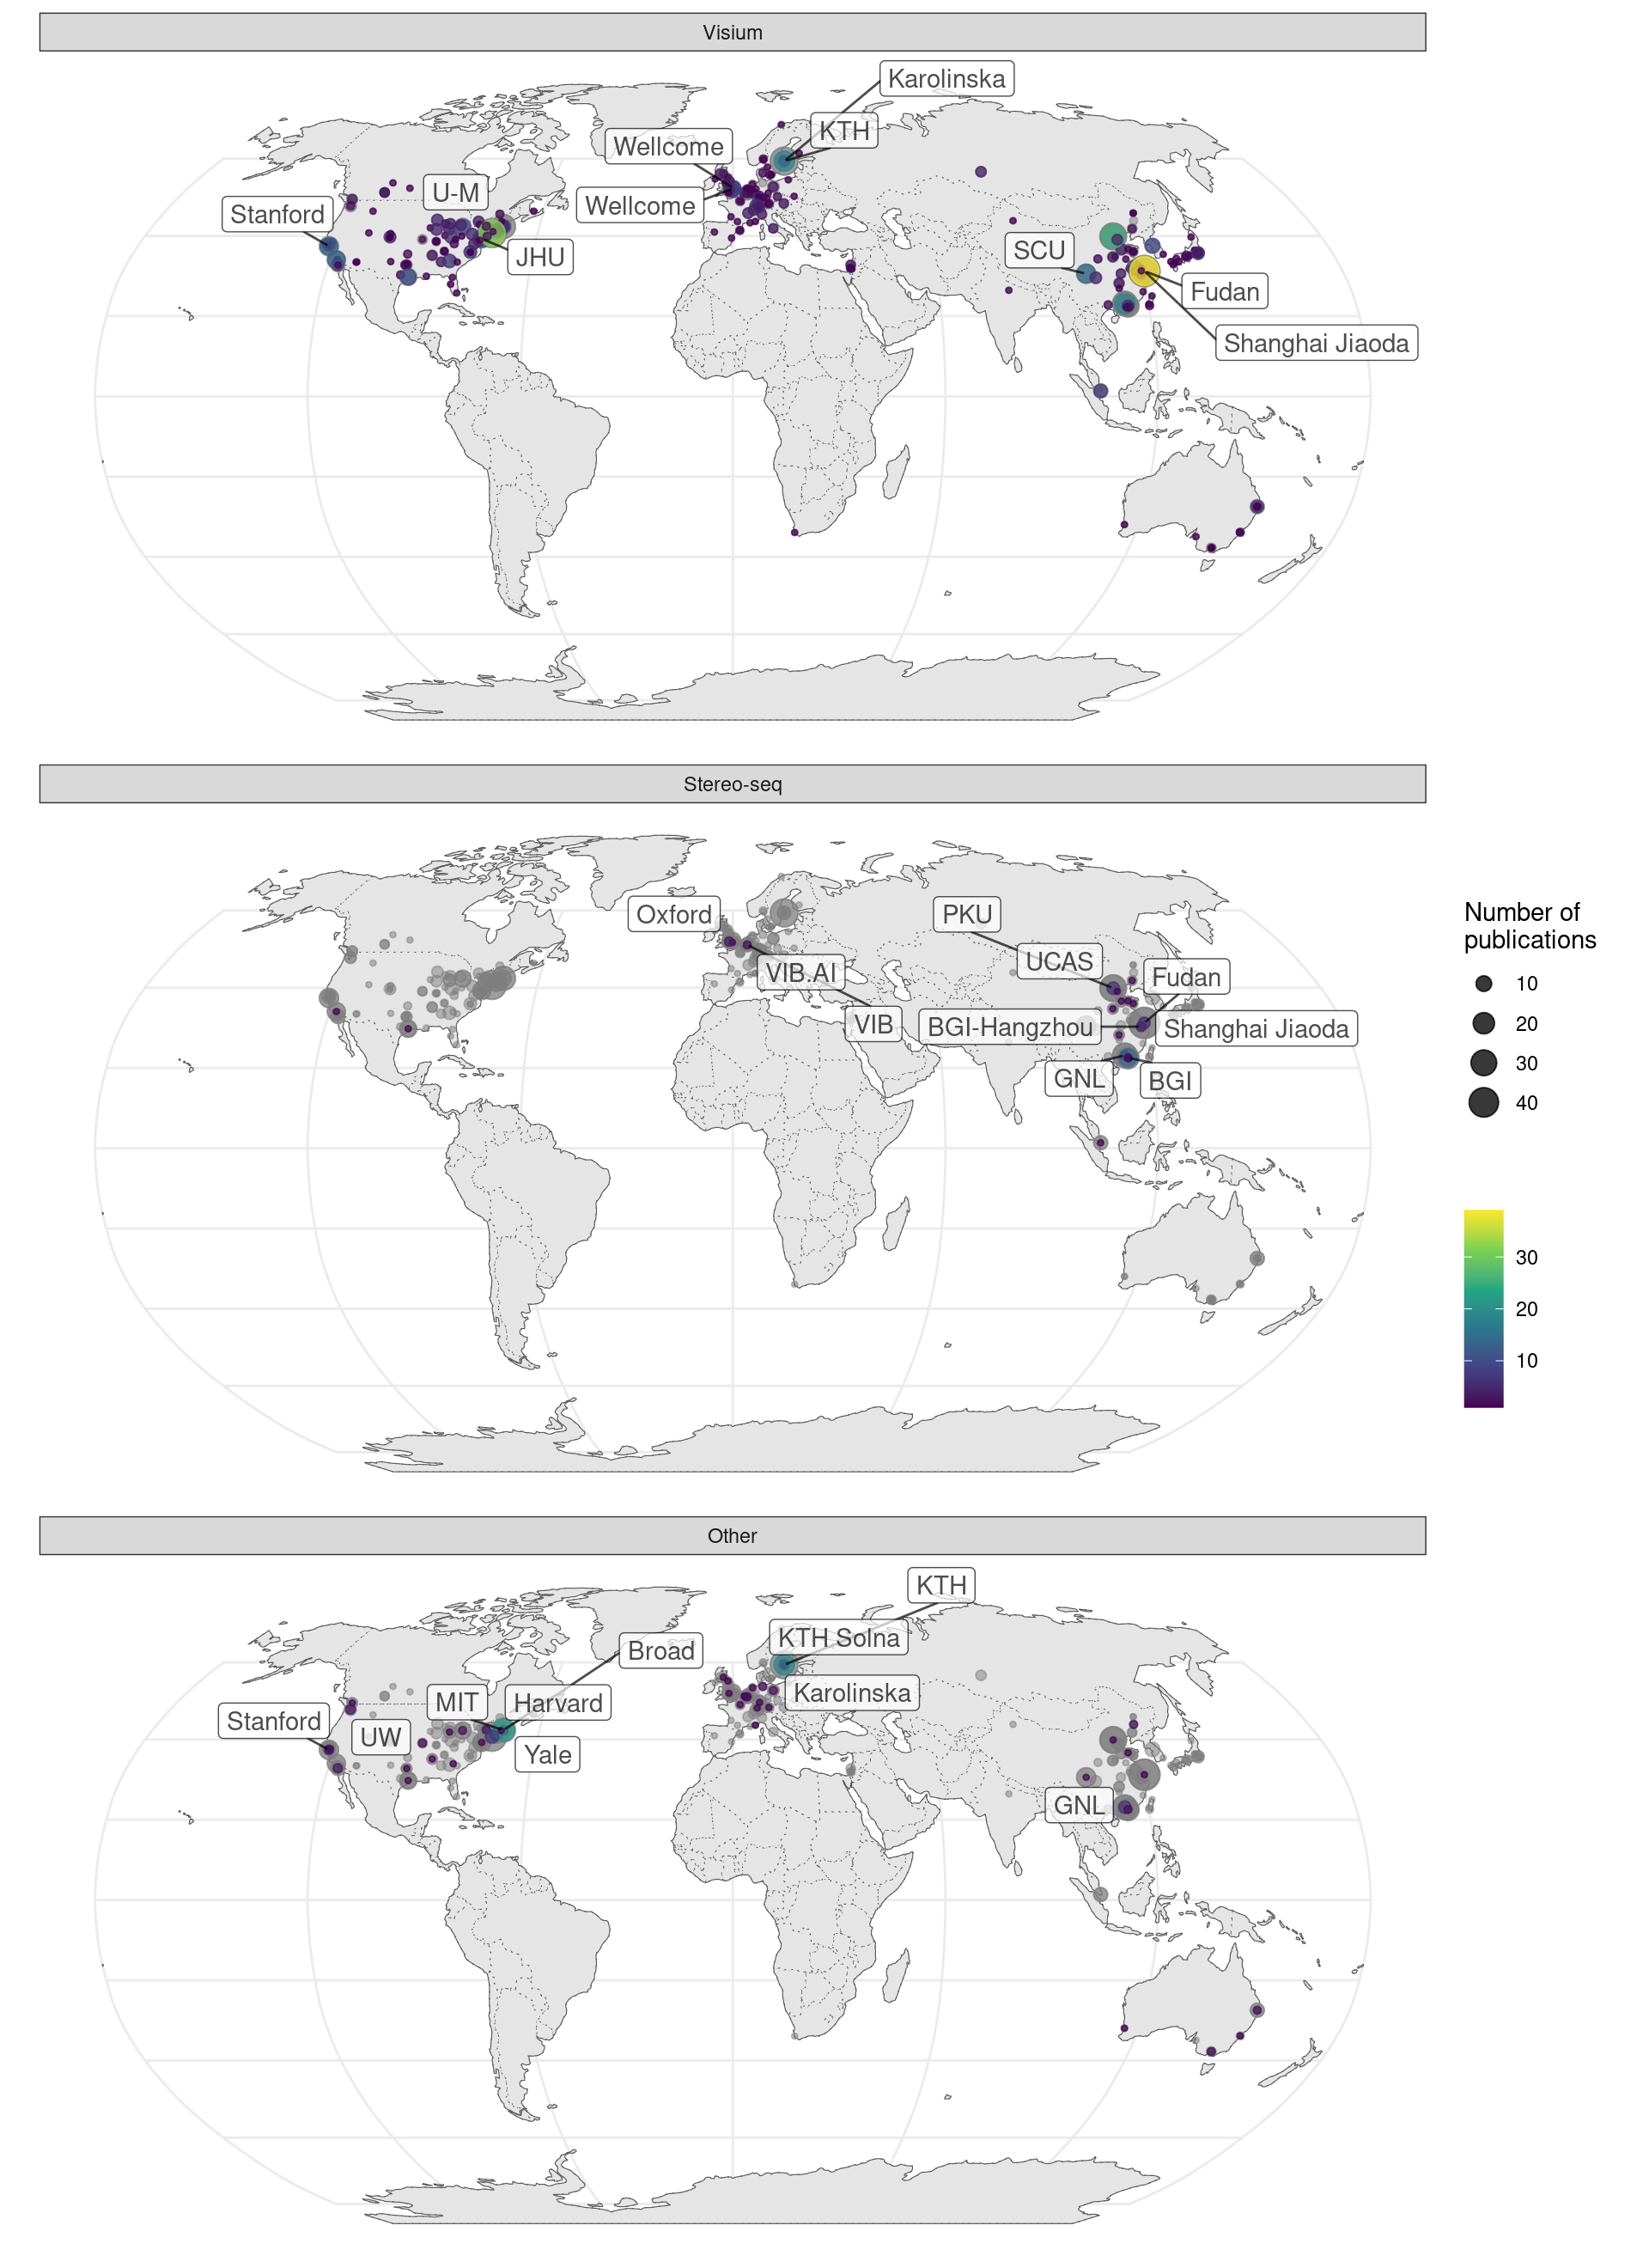 Cities and institutions using the two most popular technologies worldwide, the two methods used by the most institutions. Preprints are included.